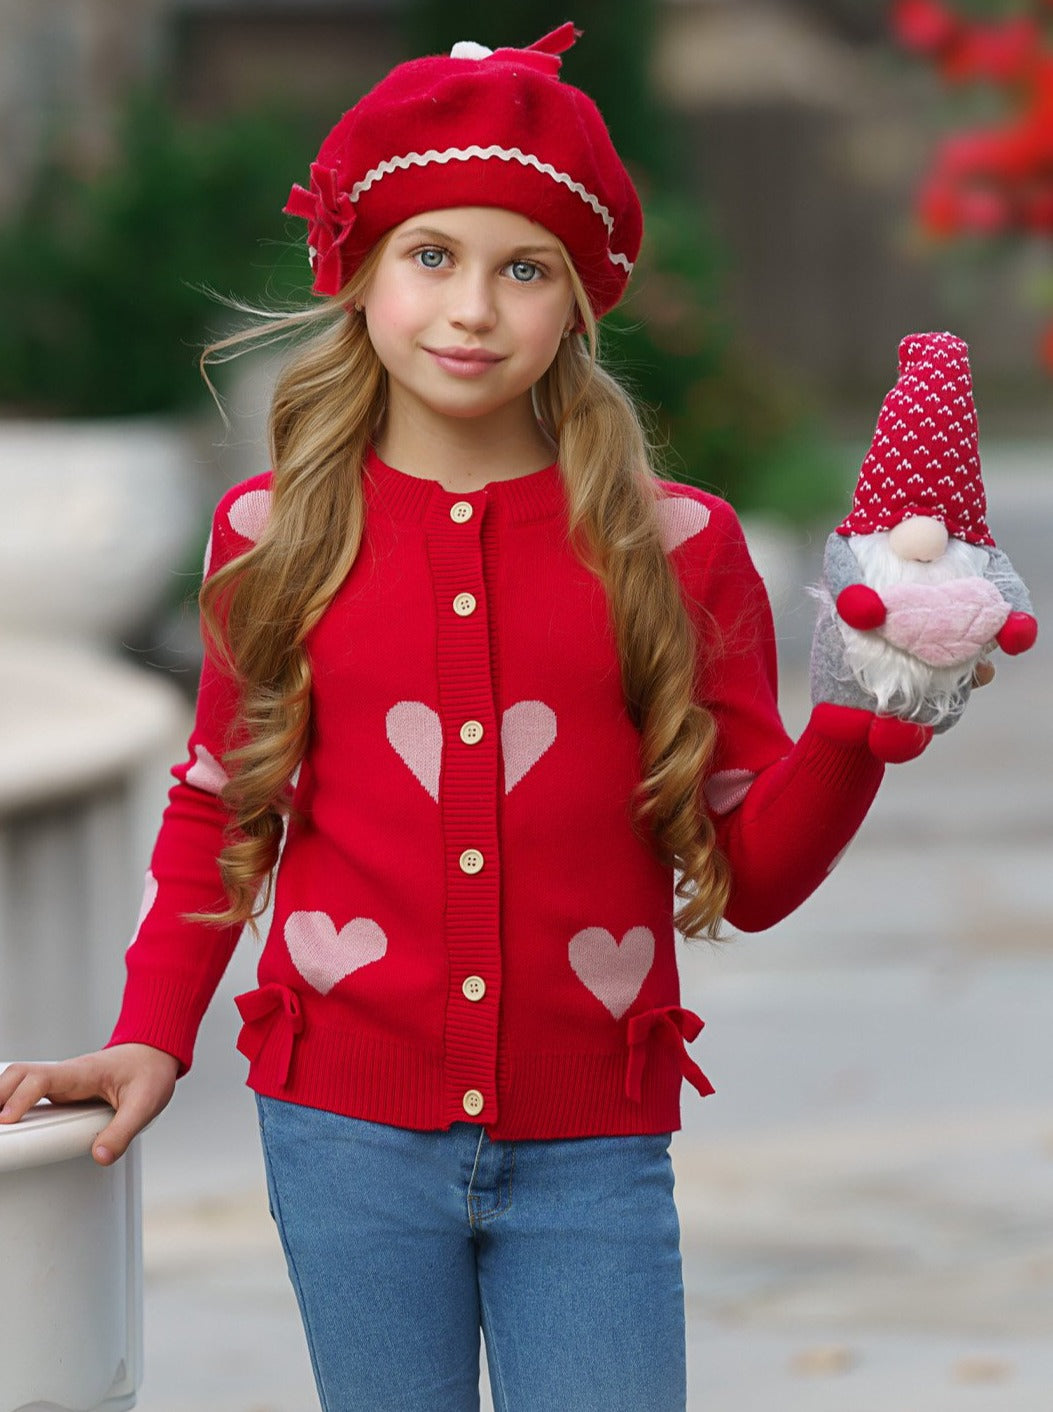 Toddler Valentine's Clothes | Girls Heart Cardigan & Bowed Jeans Set 